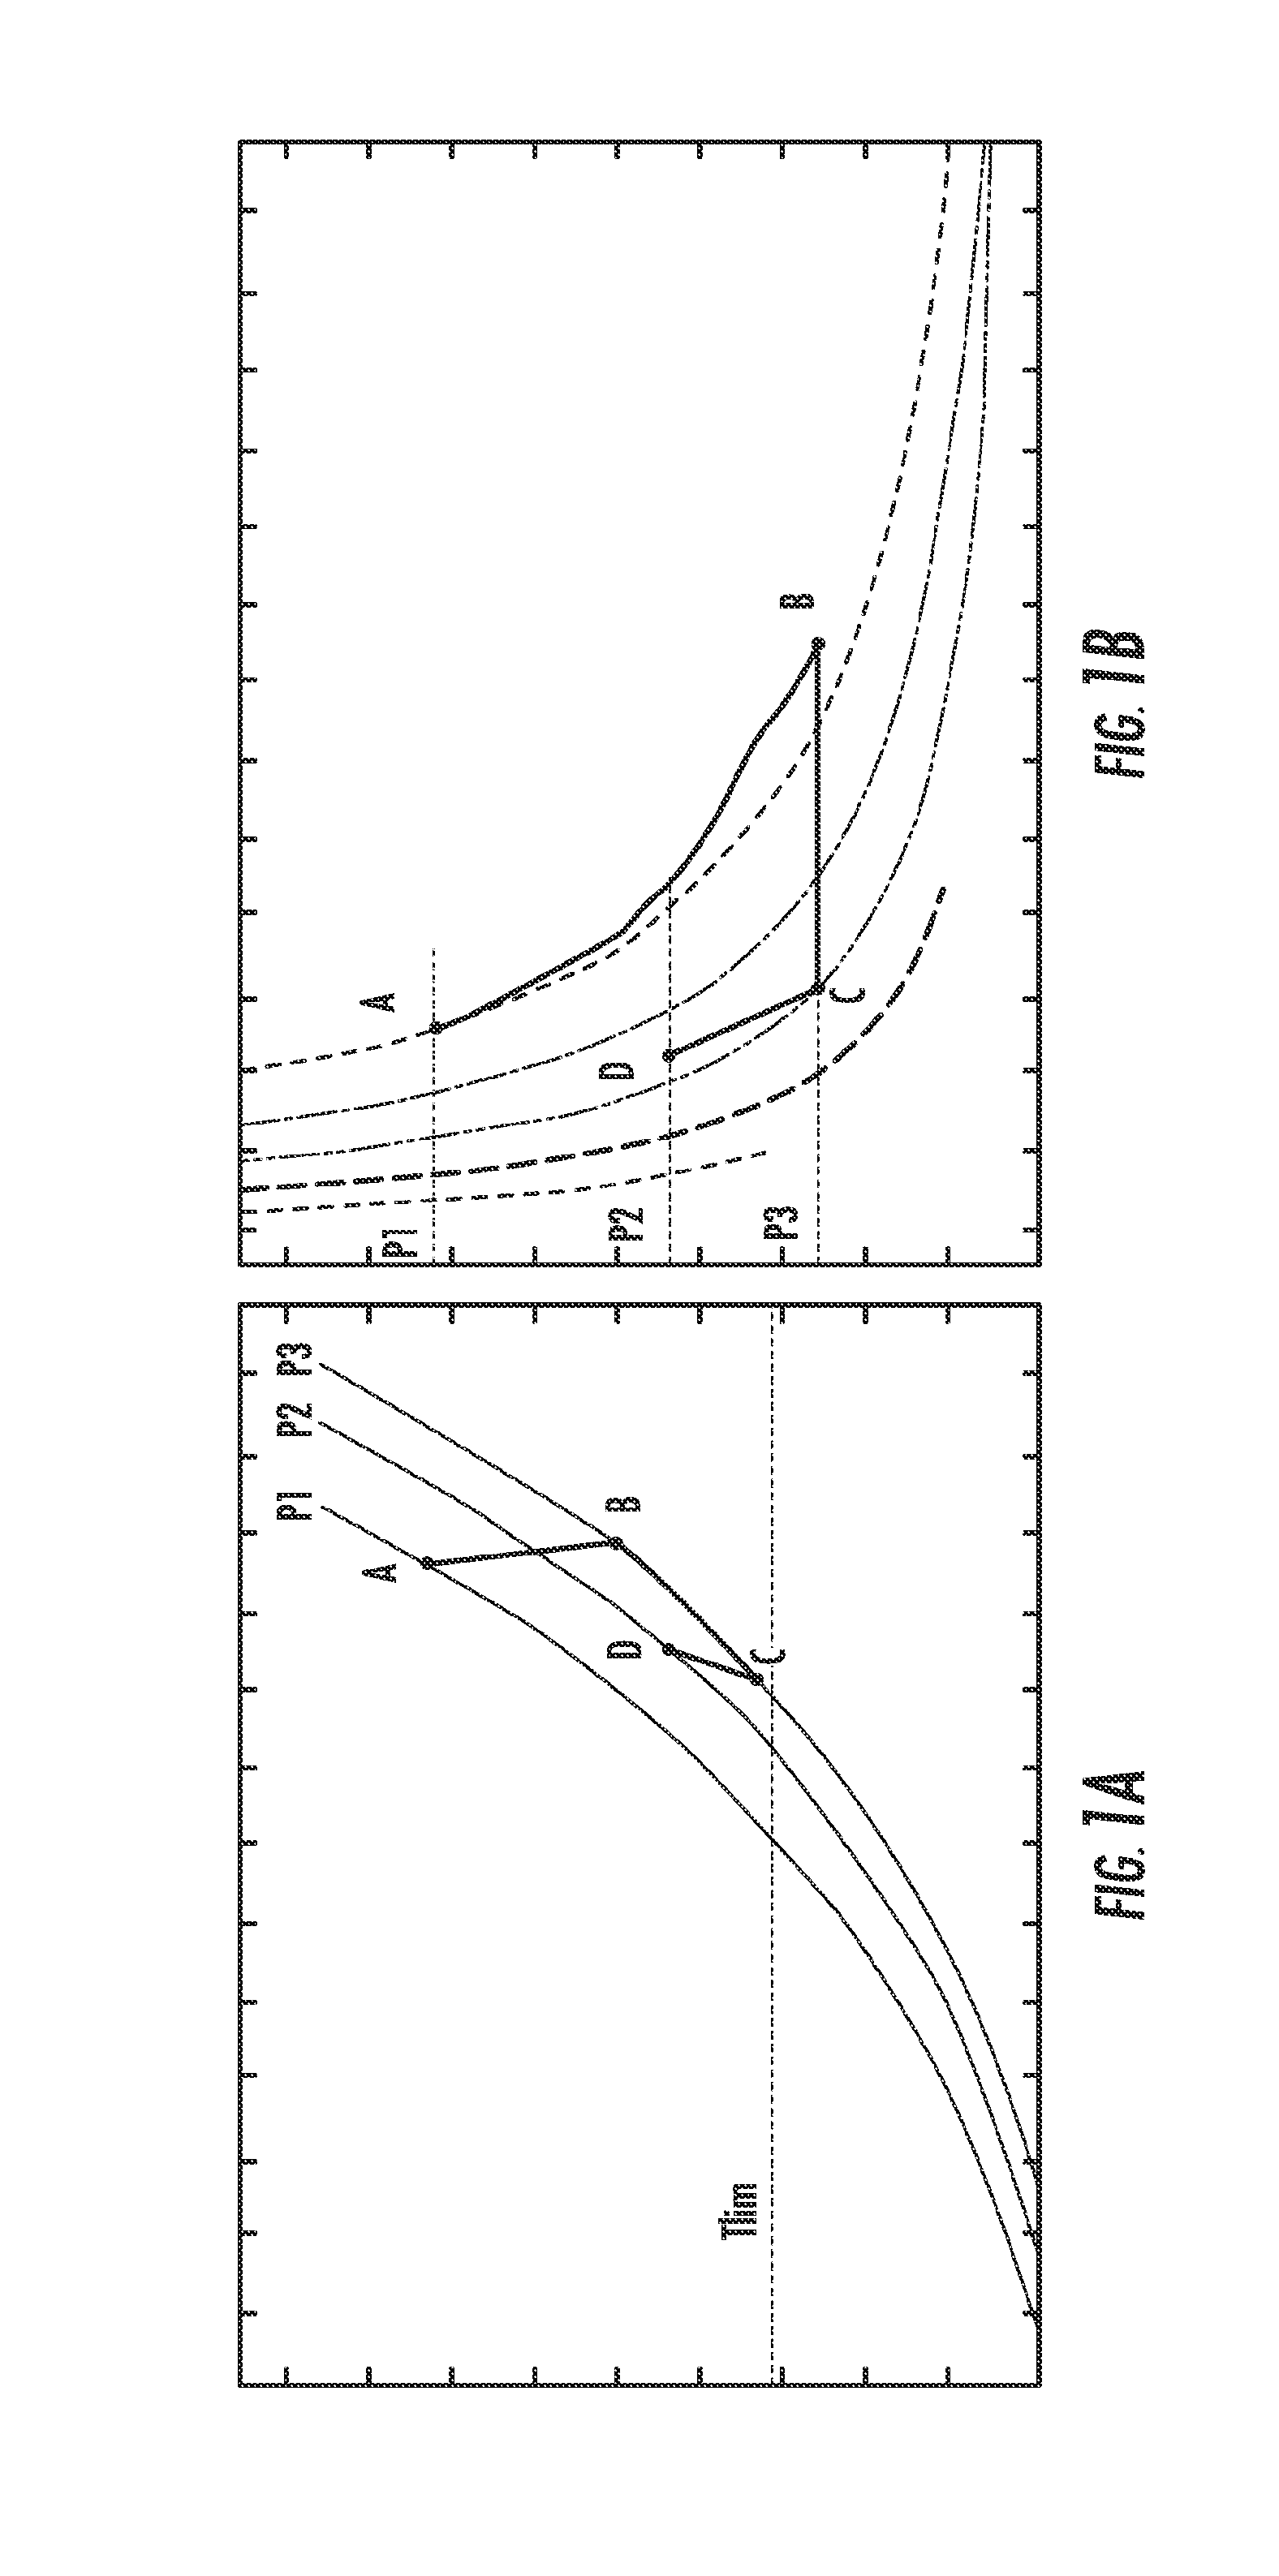 Systems and methods for implementing an open thermodynamic cycle for extracting energy from a gas